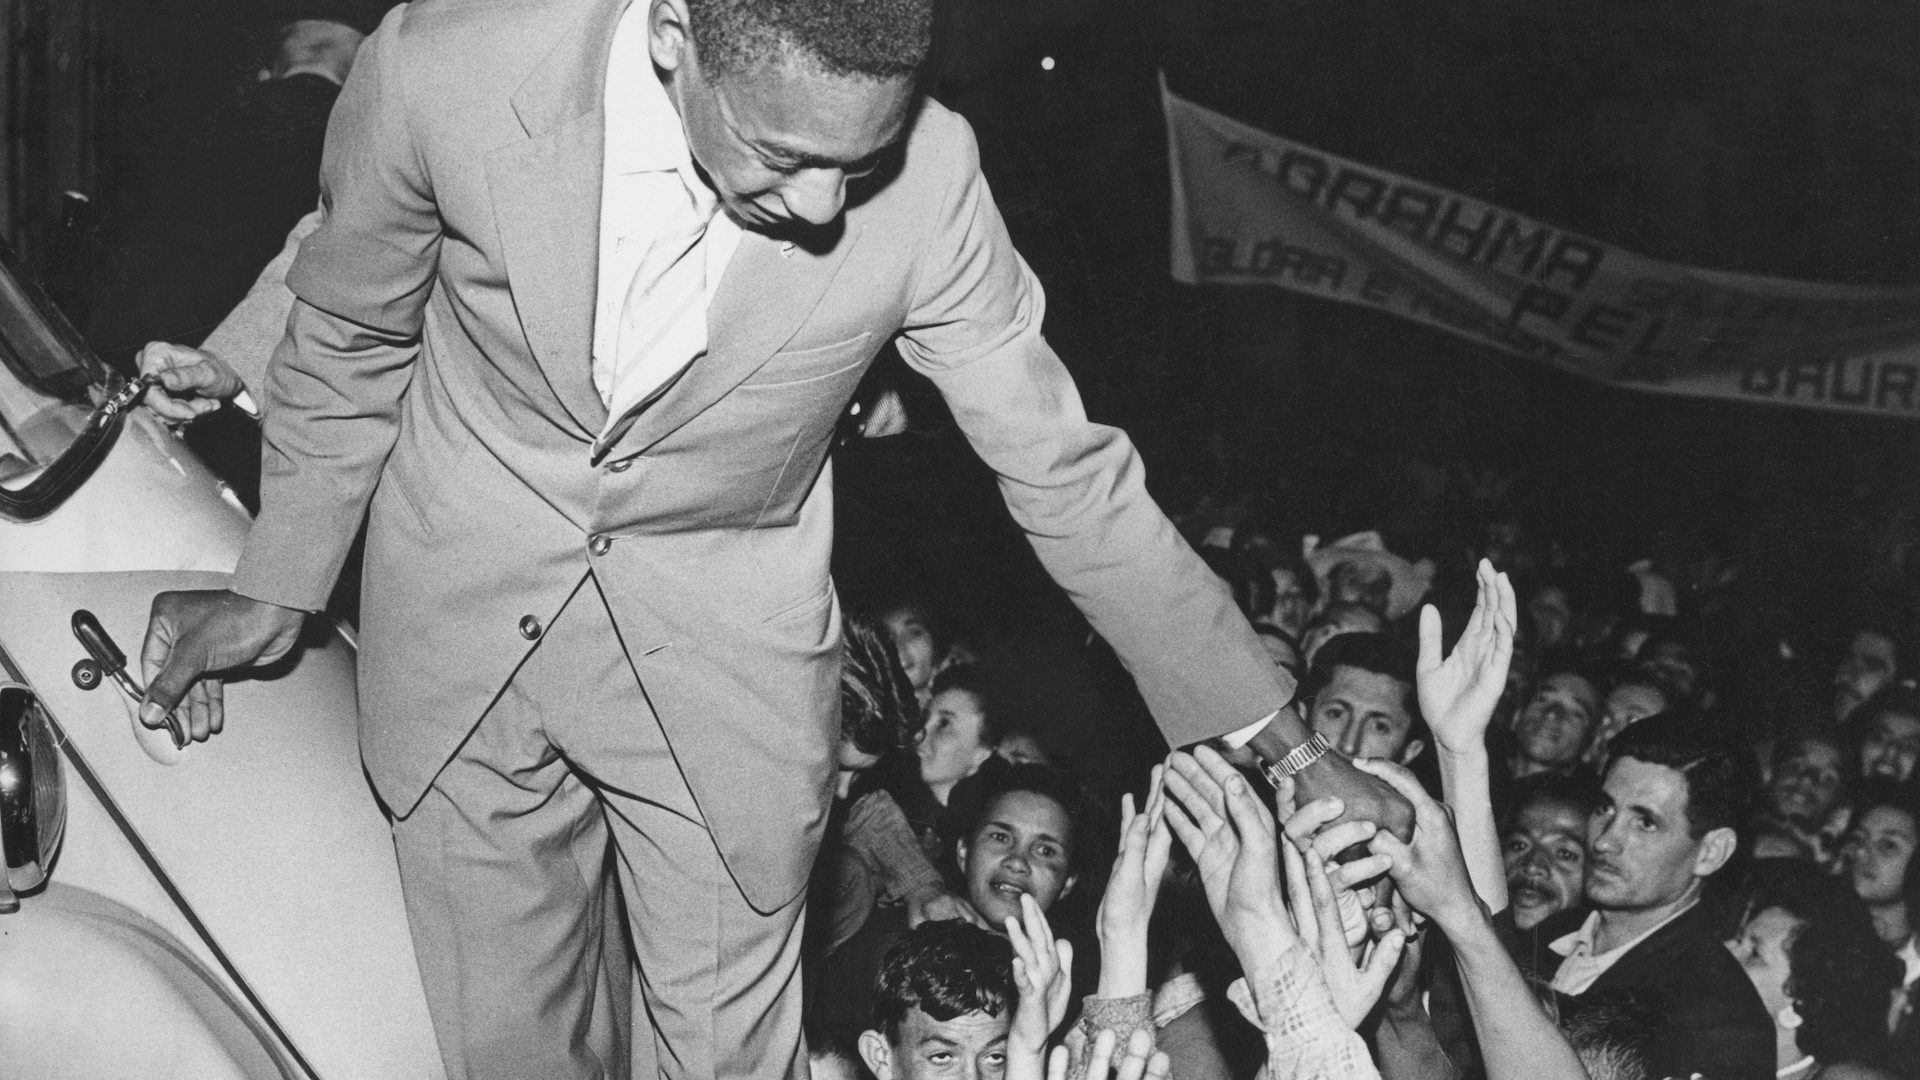 The young Pelé meets
adoring fans in Bauru, SãoPaulo, after Brazil’s victoryin the 1958 World Cup. Photo: Pictorial Parade/
Archive Photos/Getty